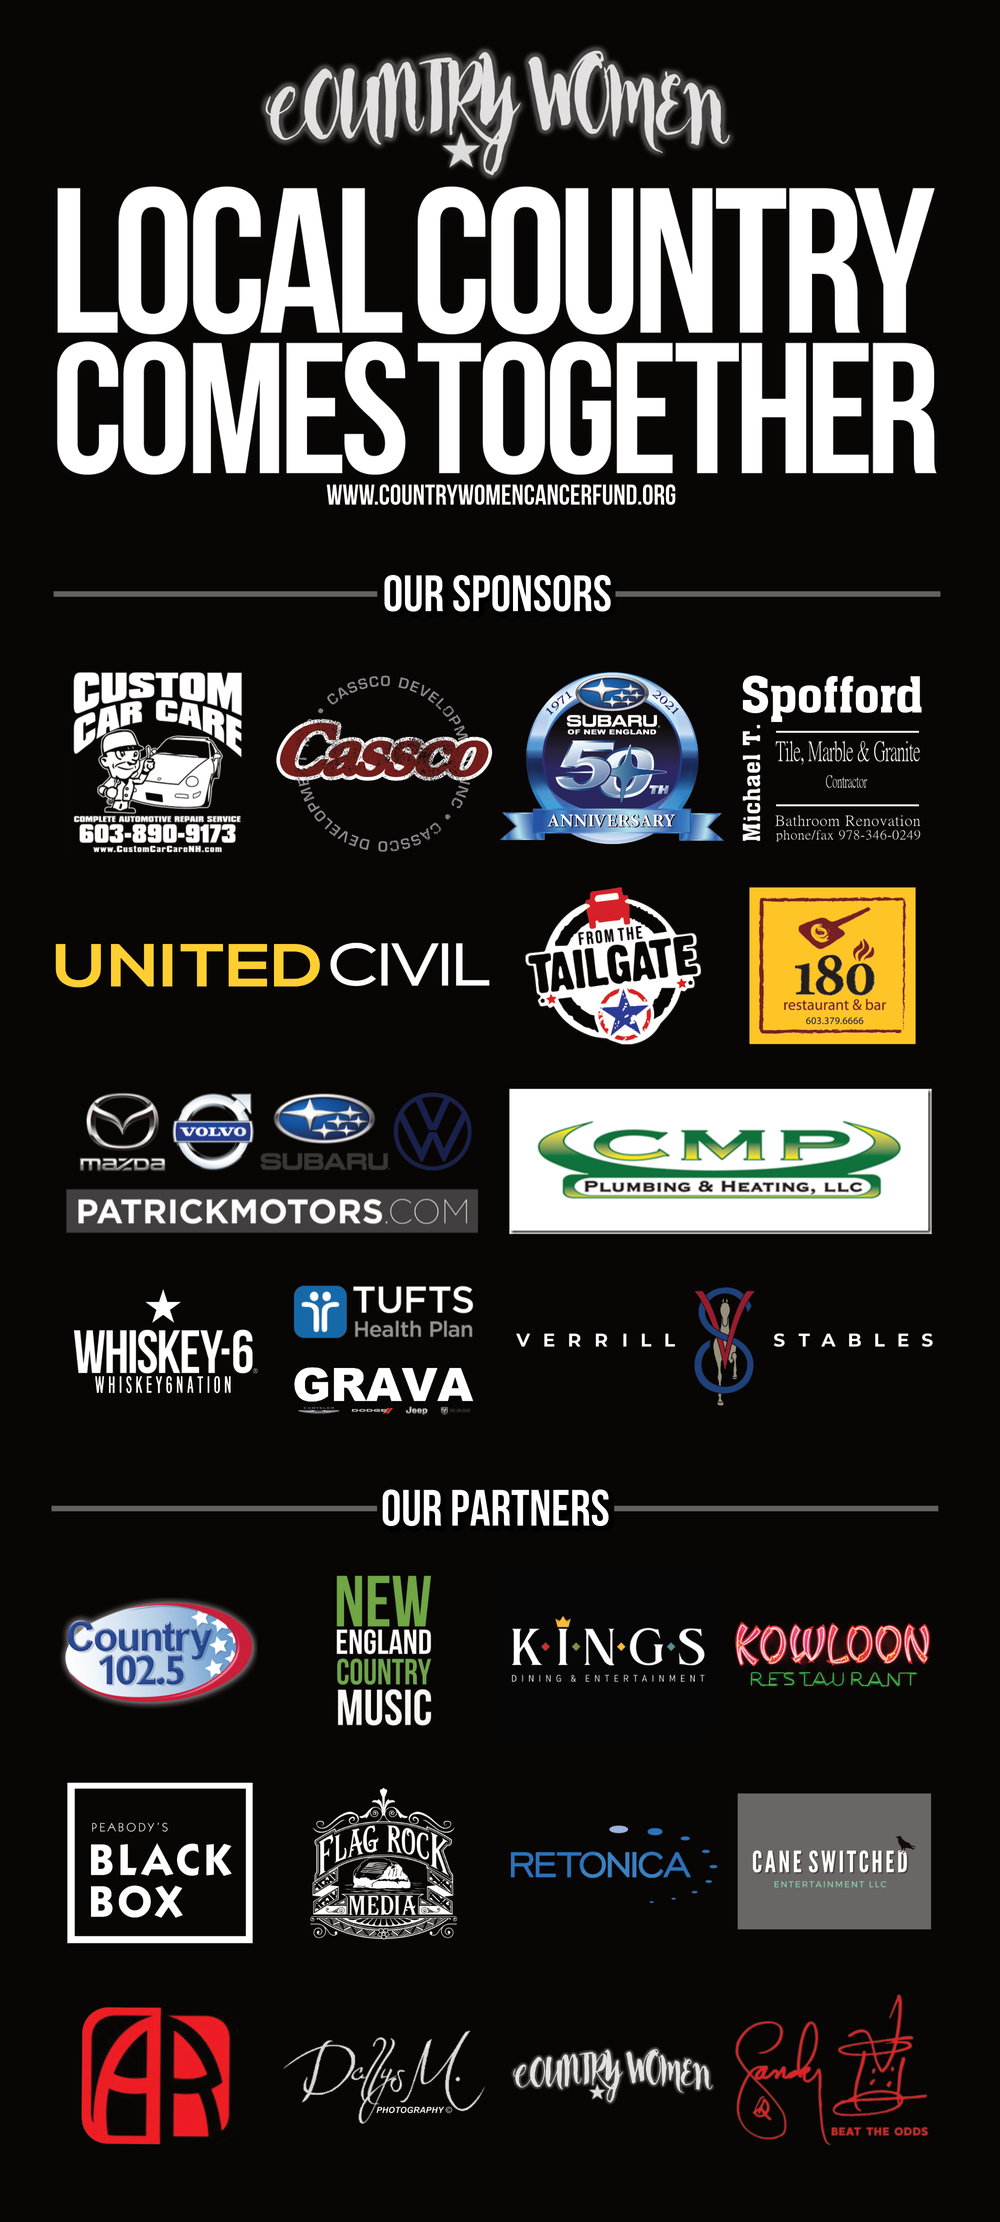 Thank you to our event sponsors and proud partners!